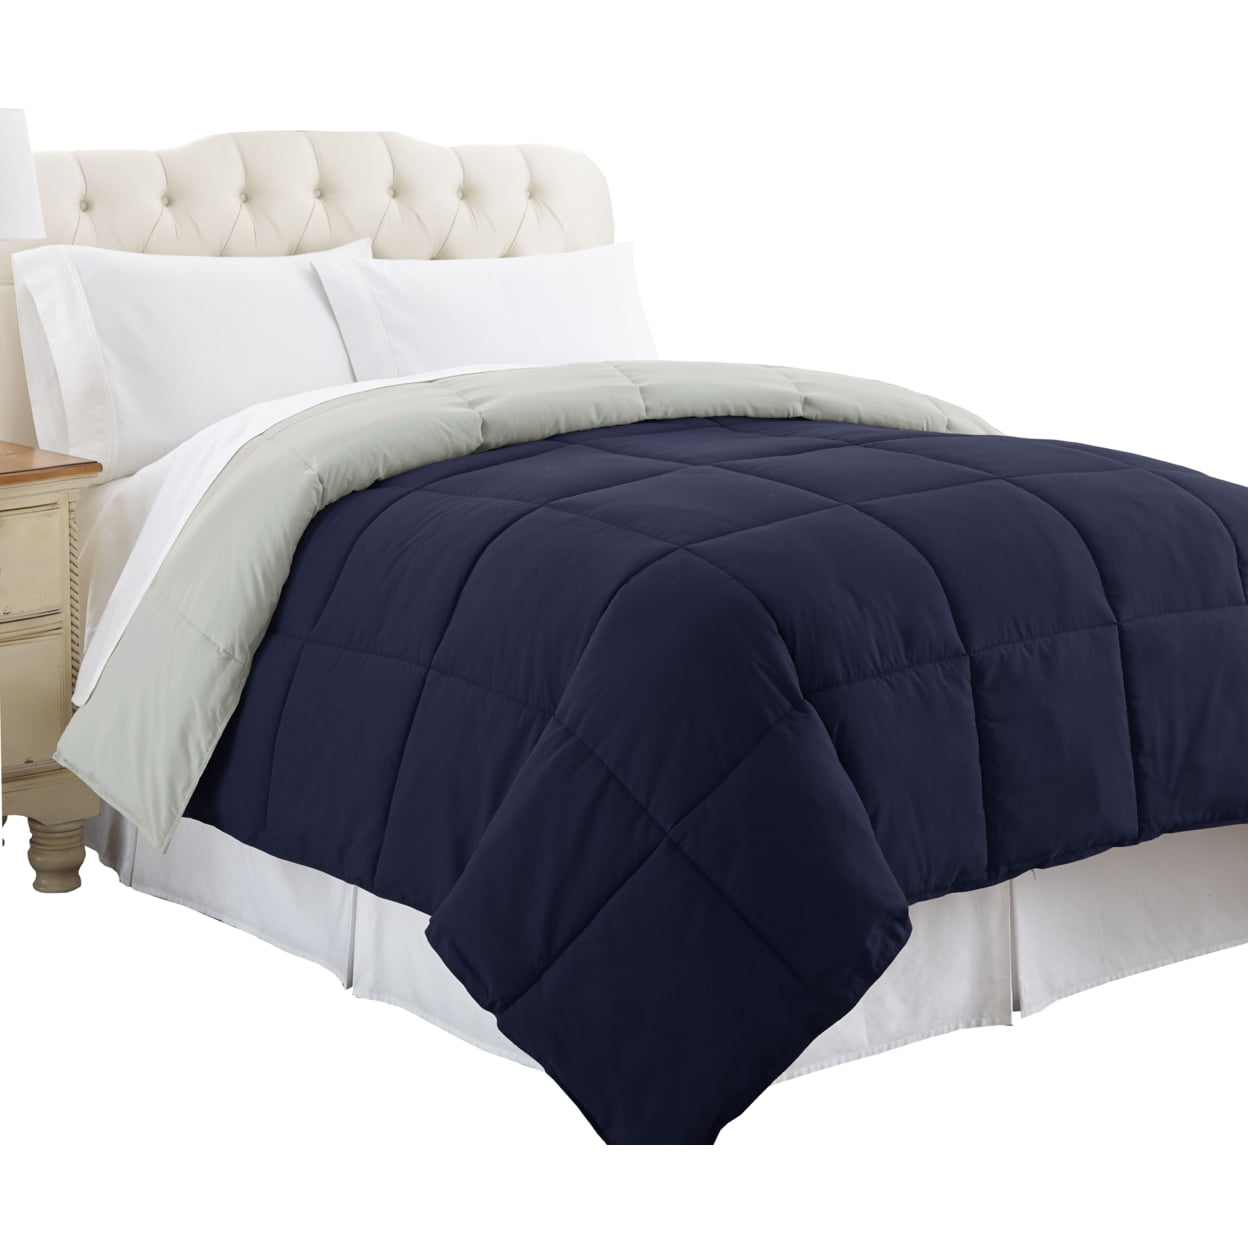 Bm46029 Genoa King Size Box Quilted Reversible Comforter, Silver & Blue